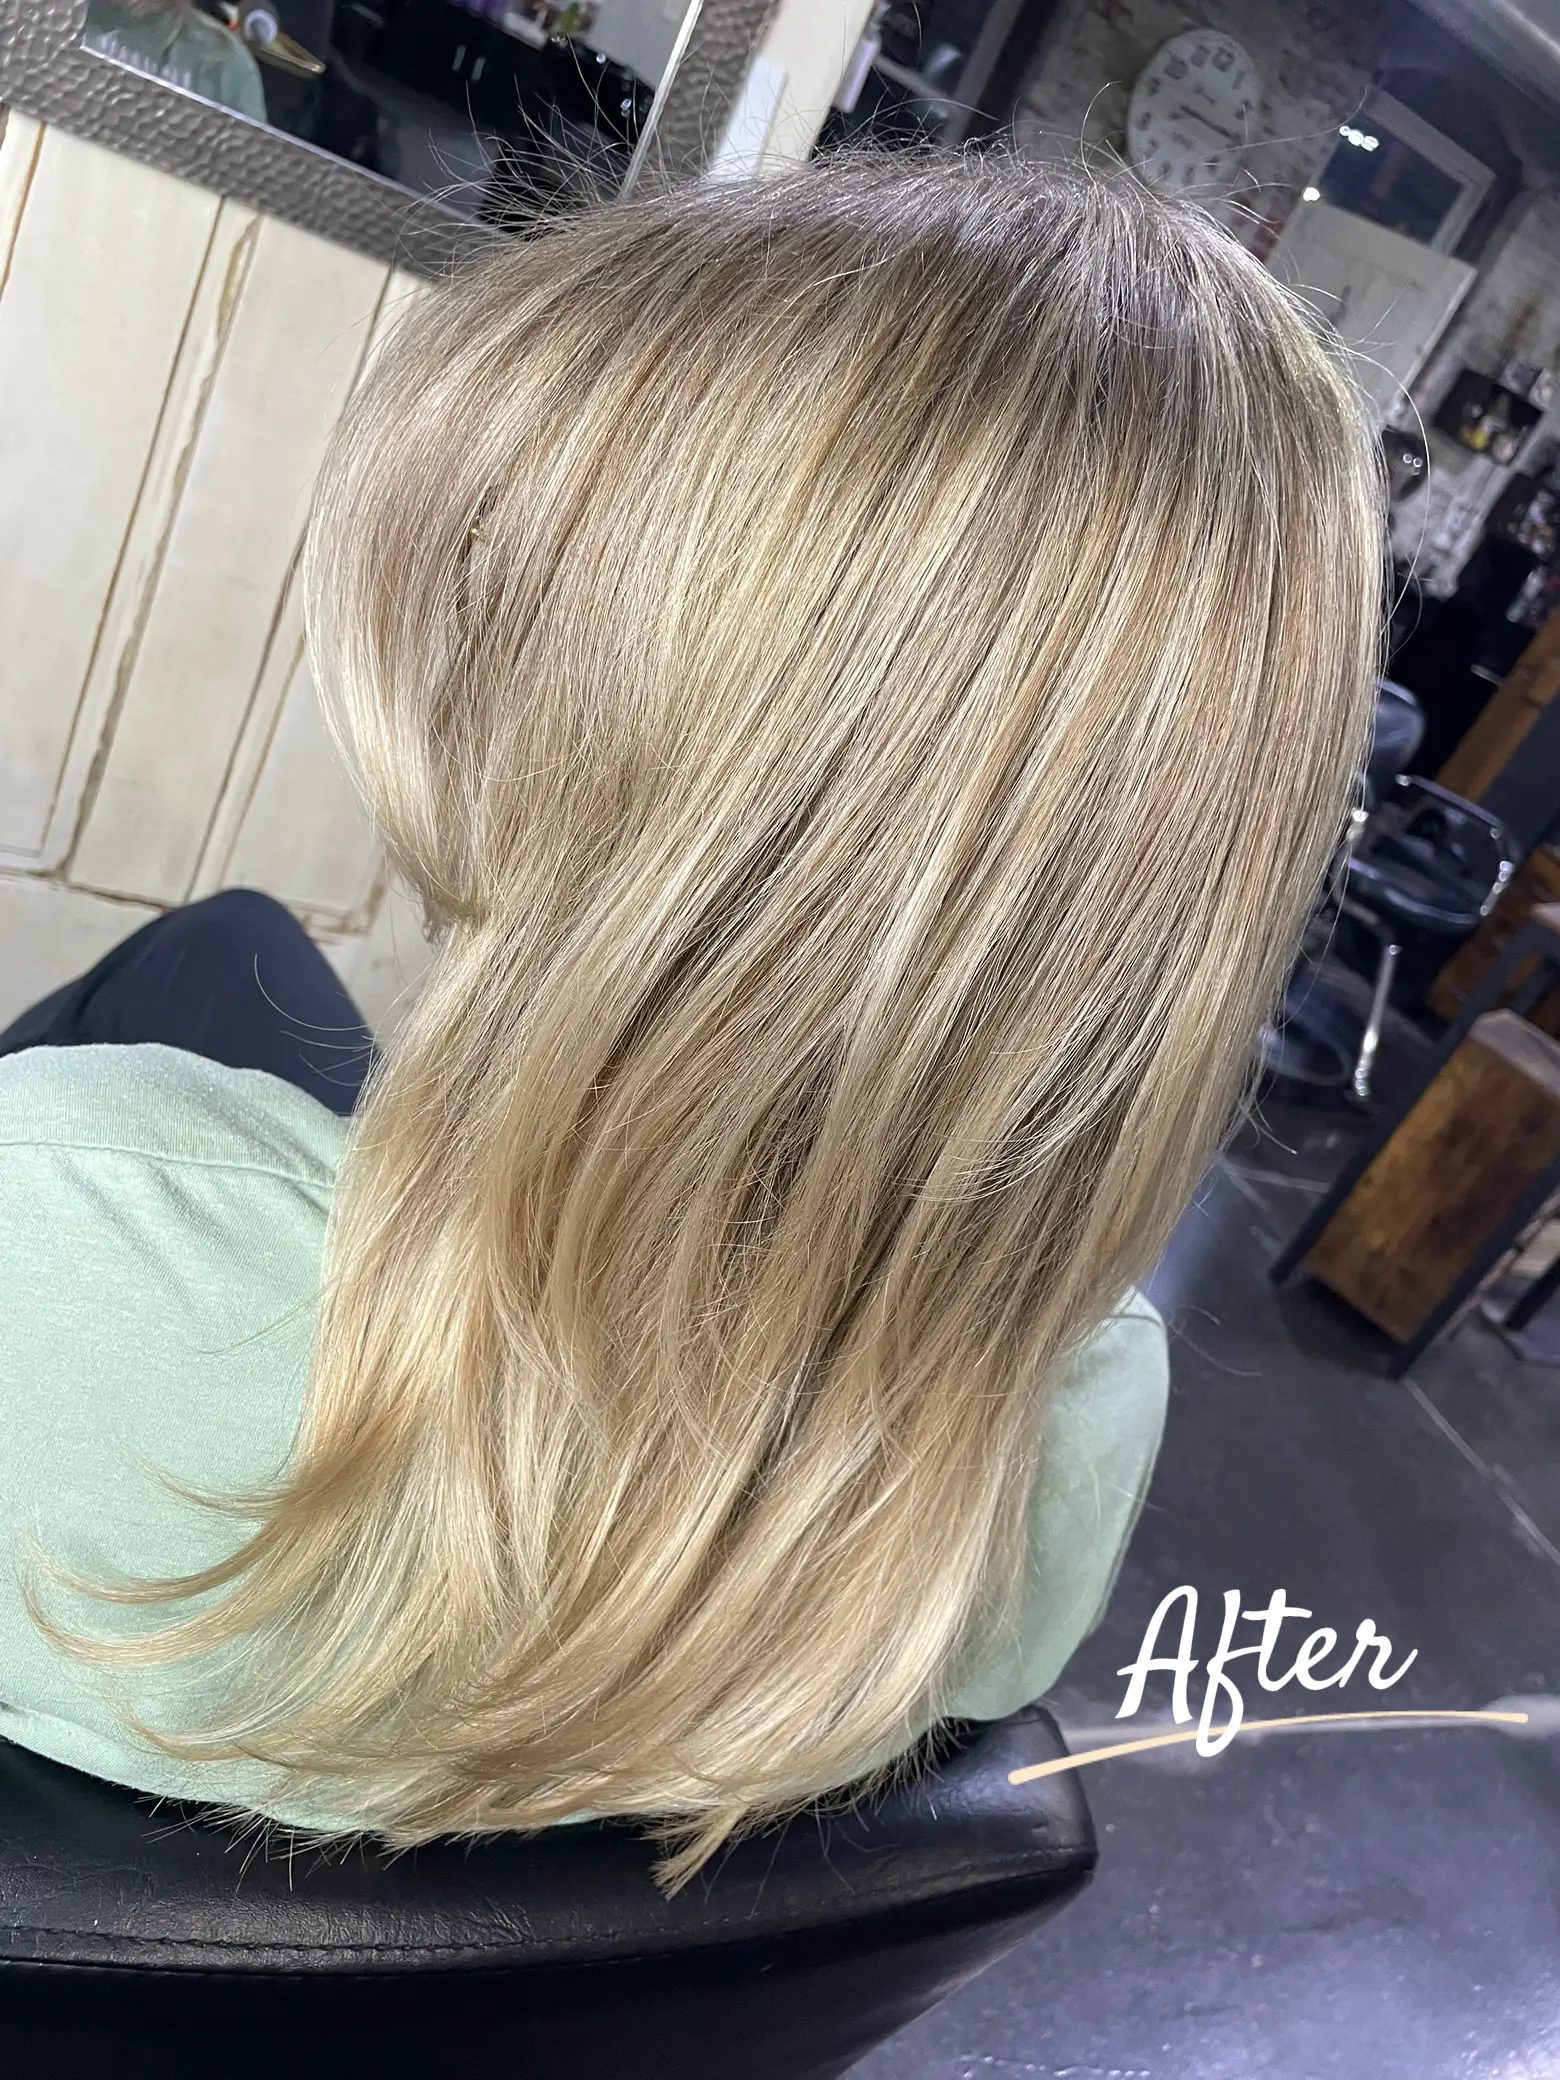 12 total foils installed for this blonde slay dream #hairstylist